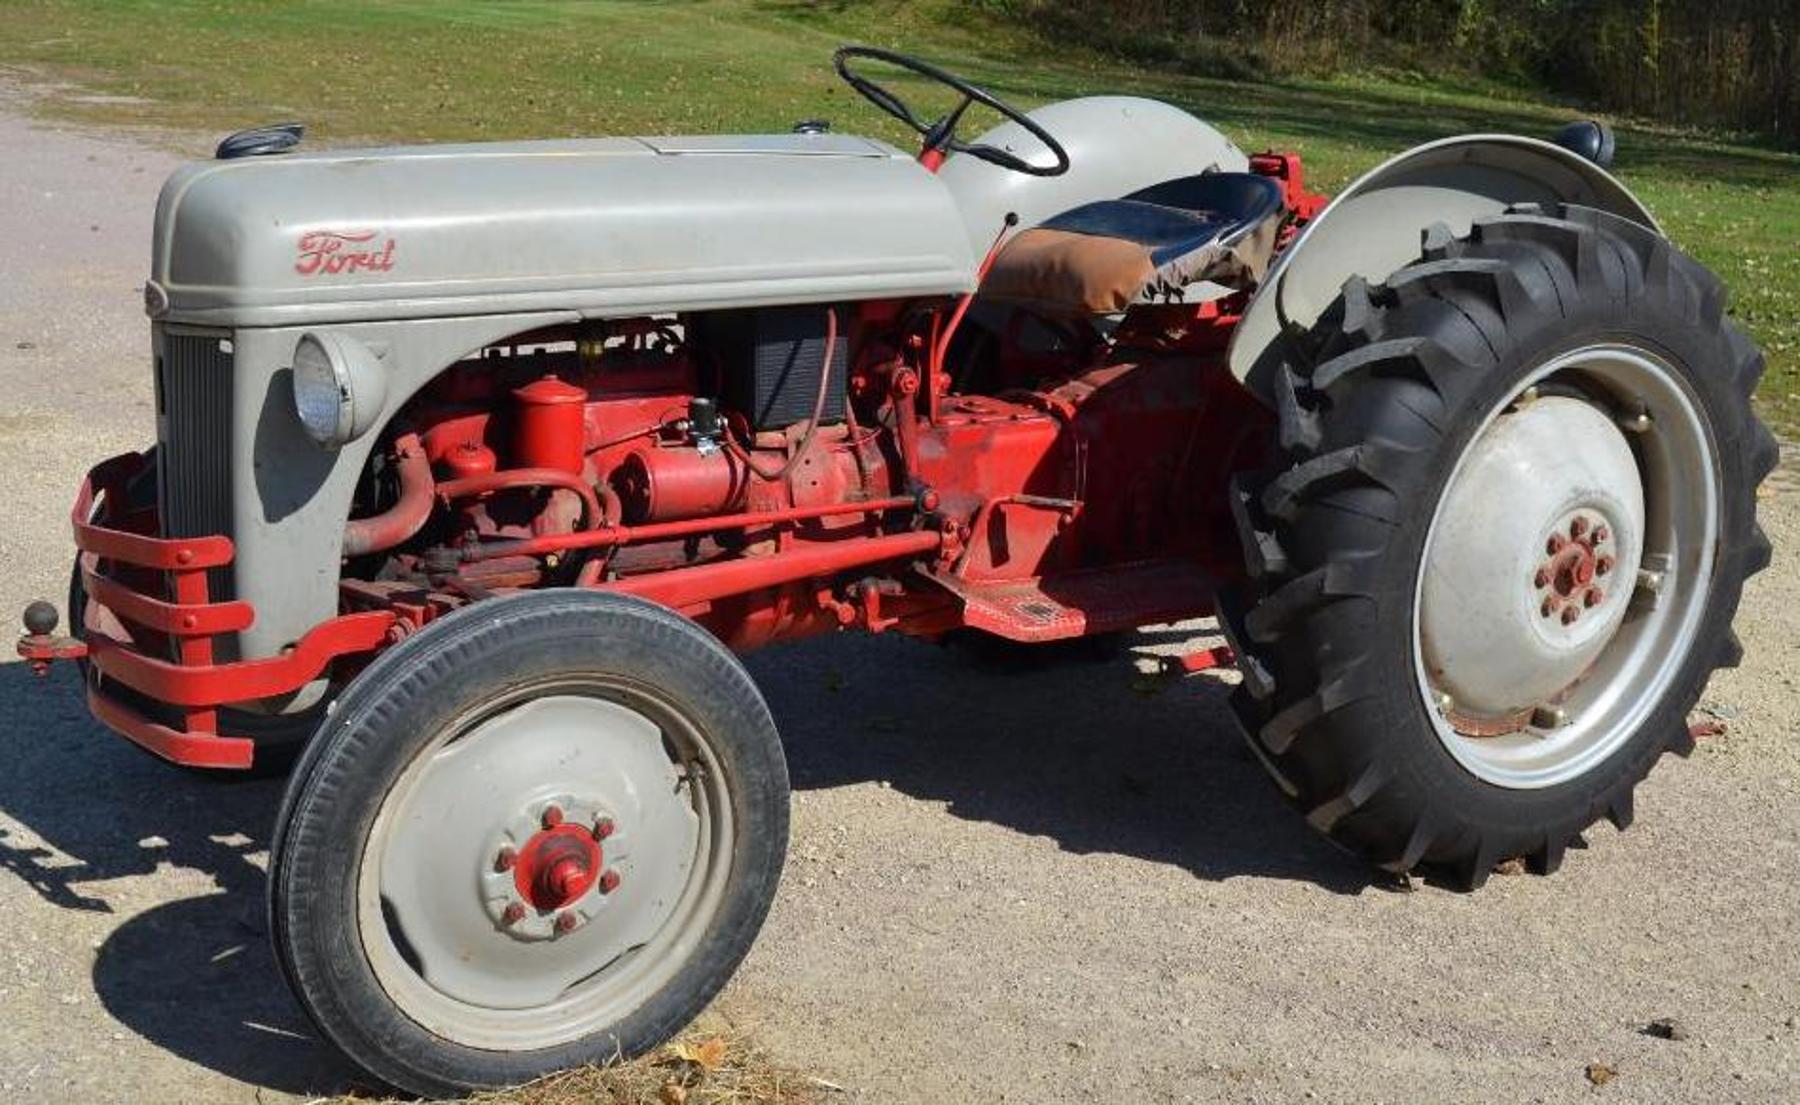 1948 8N Ford Tractor, 2008 Subaru Outback, JD LA125 Lawnmower, Trailers, Coins, Vintage Items, Tools, Household